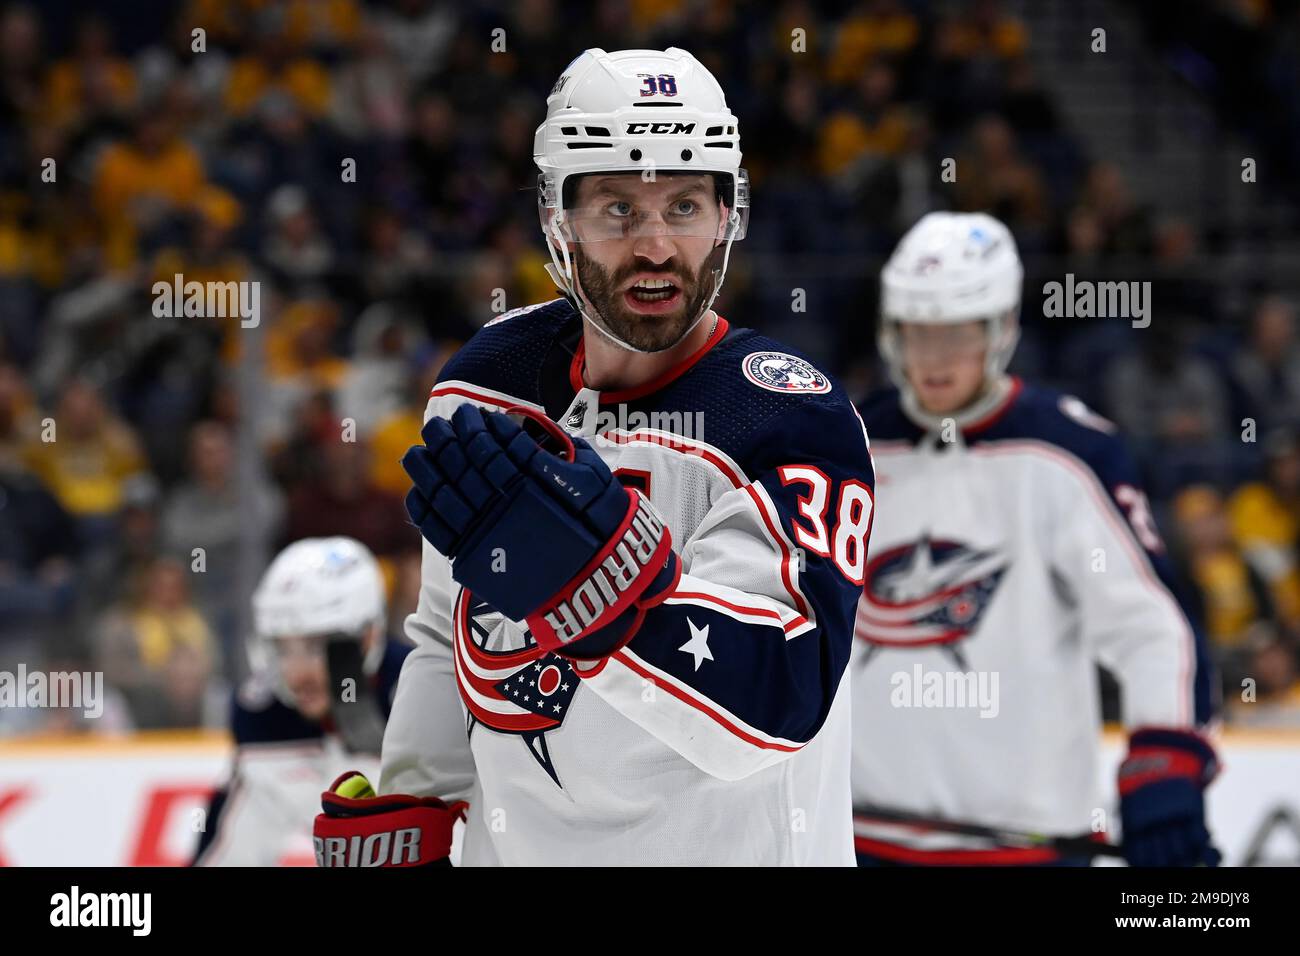 Columbus Blue Jackets center Boone Jenner (38) plays against the Nashville Predators during the third period of an NHL hockey game Tuesday, Jan